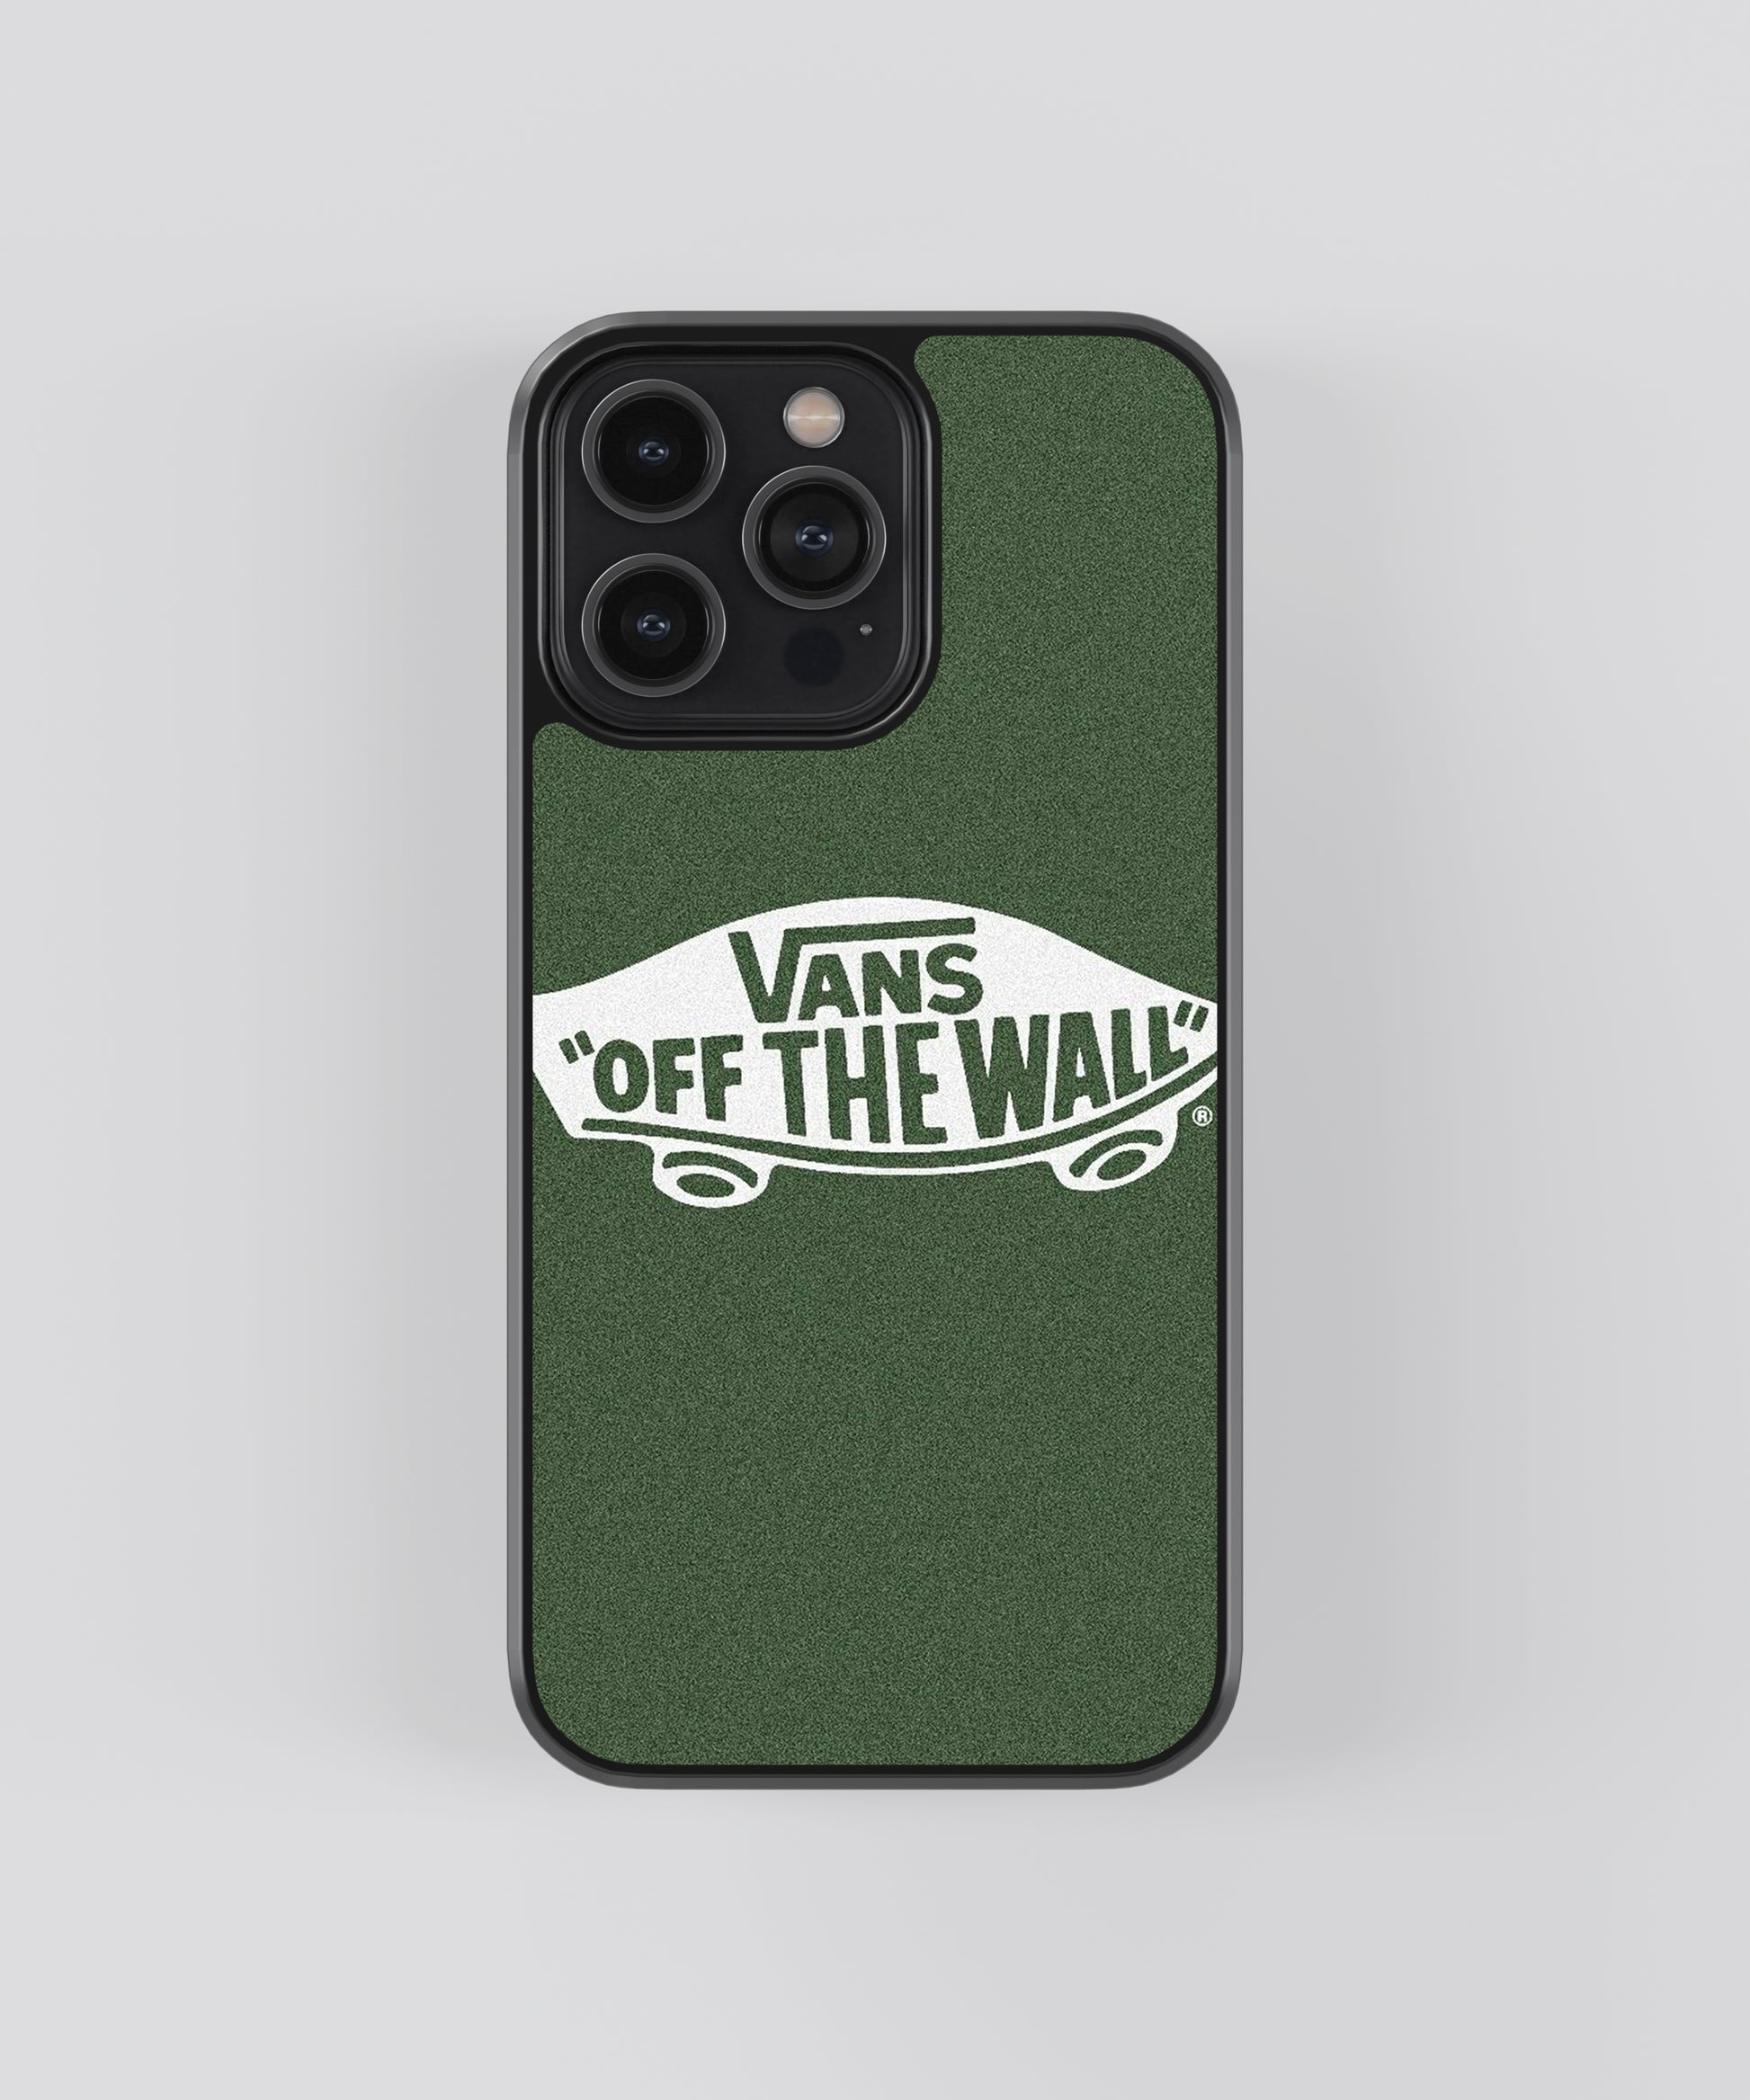 Vans "Off the Wall" Glass Phone Case Cover - Aesthetic Phone Cases - Culltique